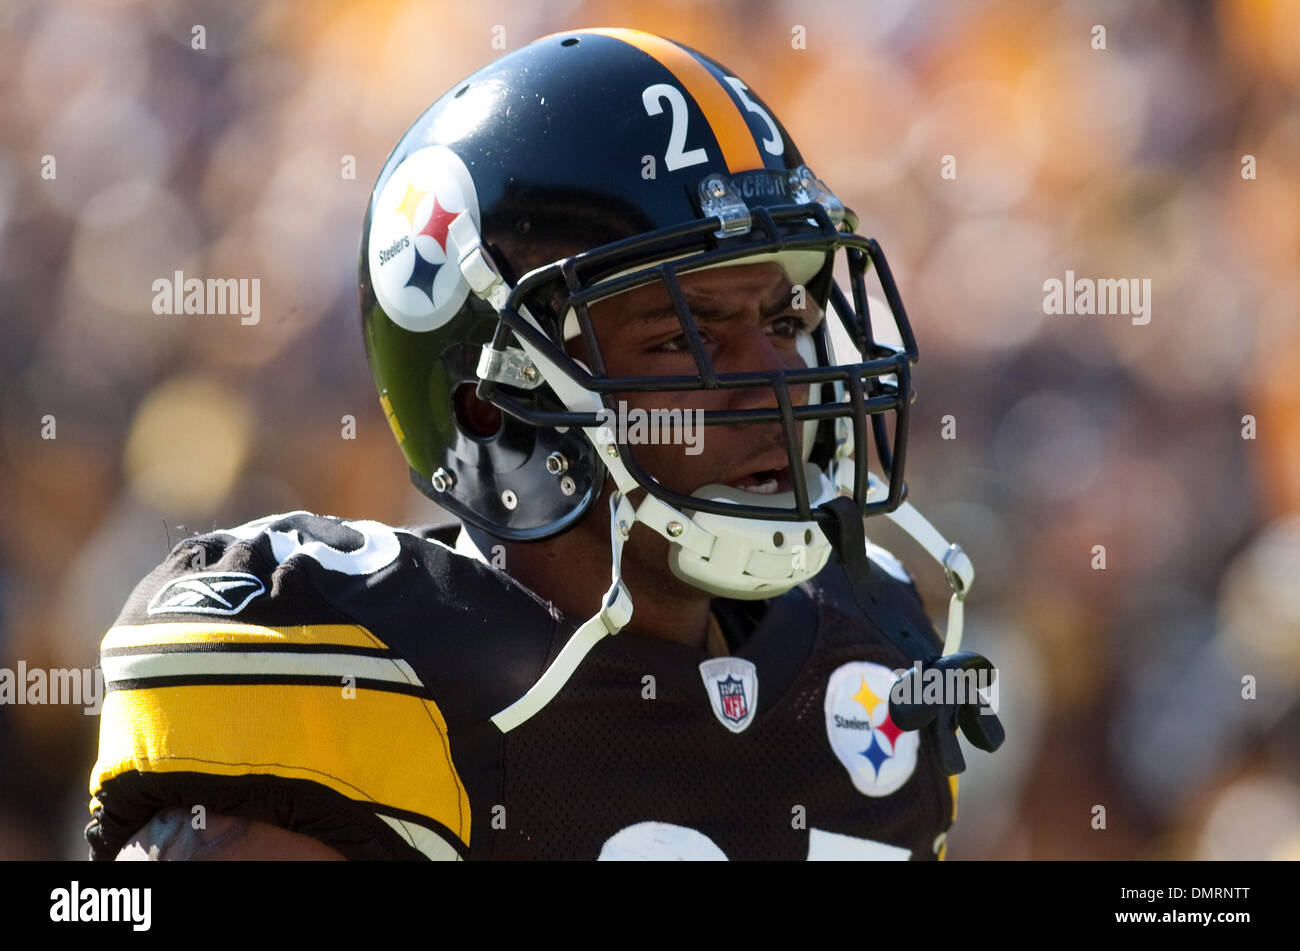 Pittsburgh Steelers defensive back Ryan Clark (25) warms up prior to a game  against the Minnesota Vikings at Heinz field in Pittsburgh PA. Pittsburgh  won the game 27-17. (Credit Image: © Mark